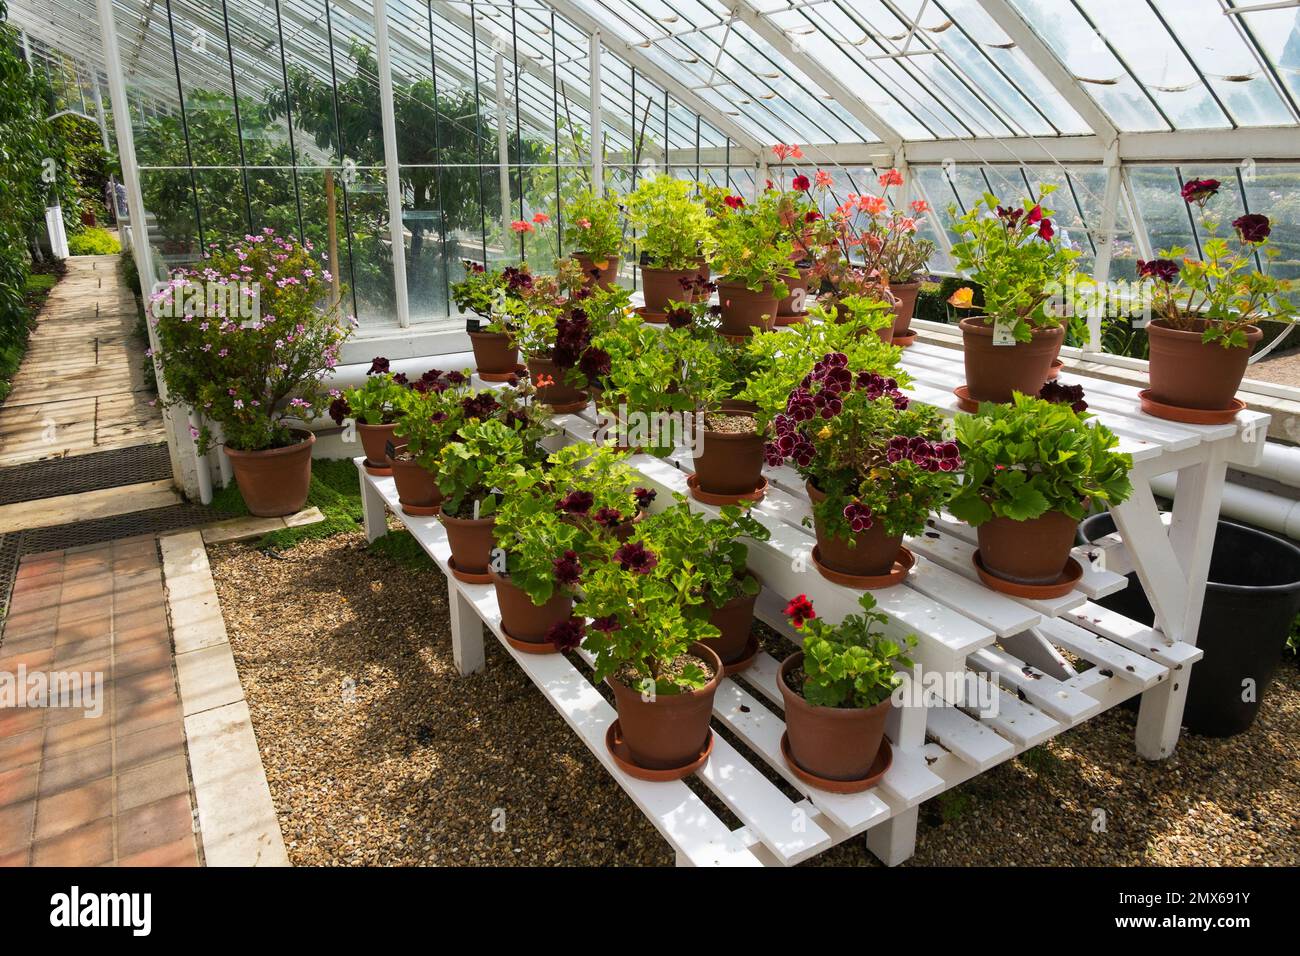 Victorian Vine House with Pelargoniums Lord Bute, Charity, Platinum, Black Prince, Burgundy and Hindu growing in terracotta pots, Arundel Castle, UK Stock Photo